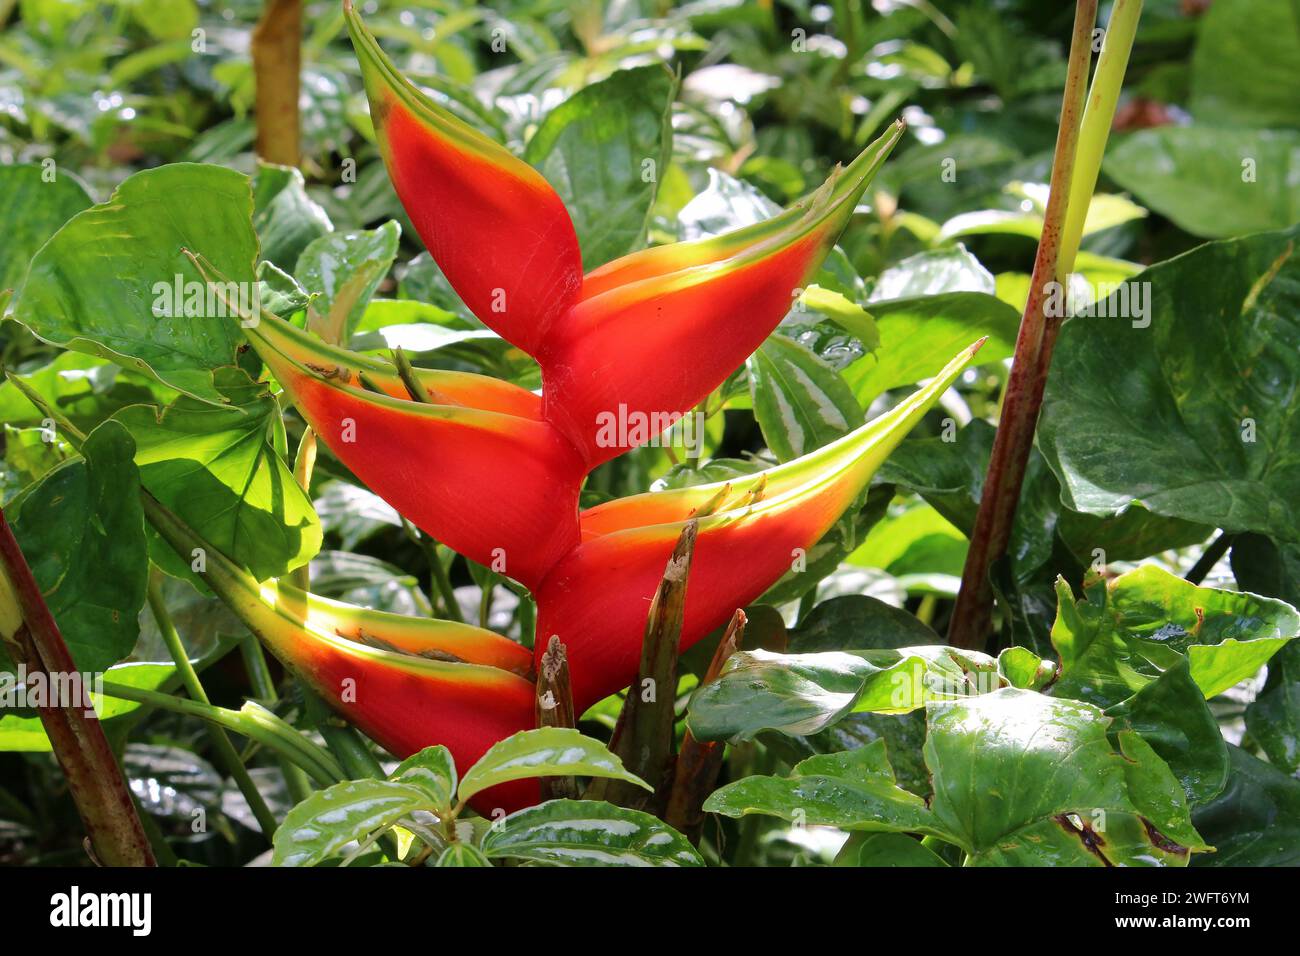 Red Caribbean Heliconia flower (Heliconia caribaea Lam) surrounded by green leaves Stock Photo